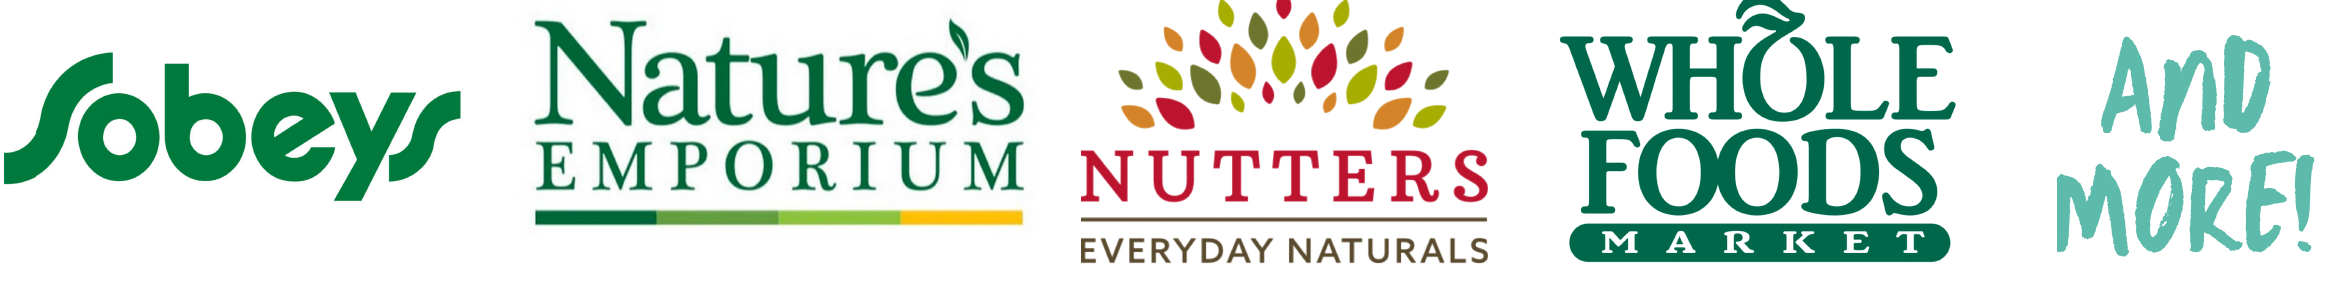 Find oat-based yogurts, kefir, and spread at these stores, Sobeys, Nature's Emporium, nutters, Whole Foods, and more!